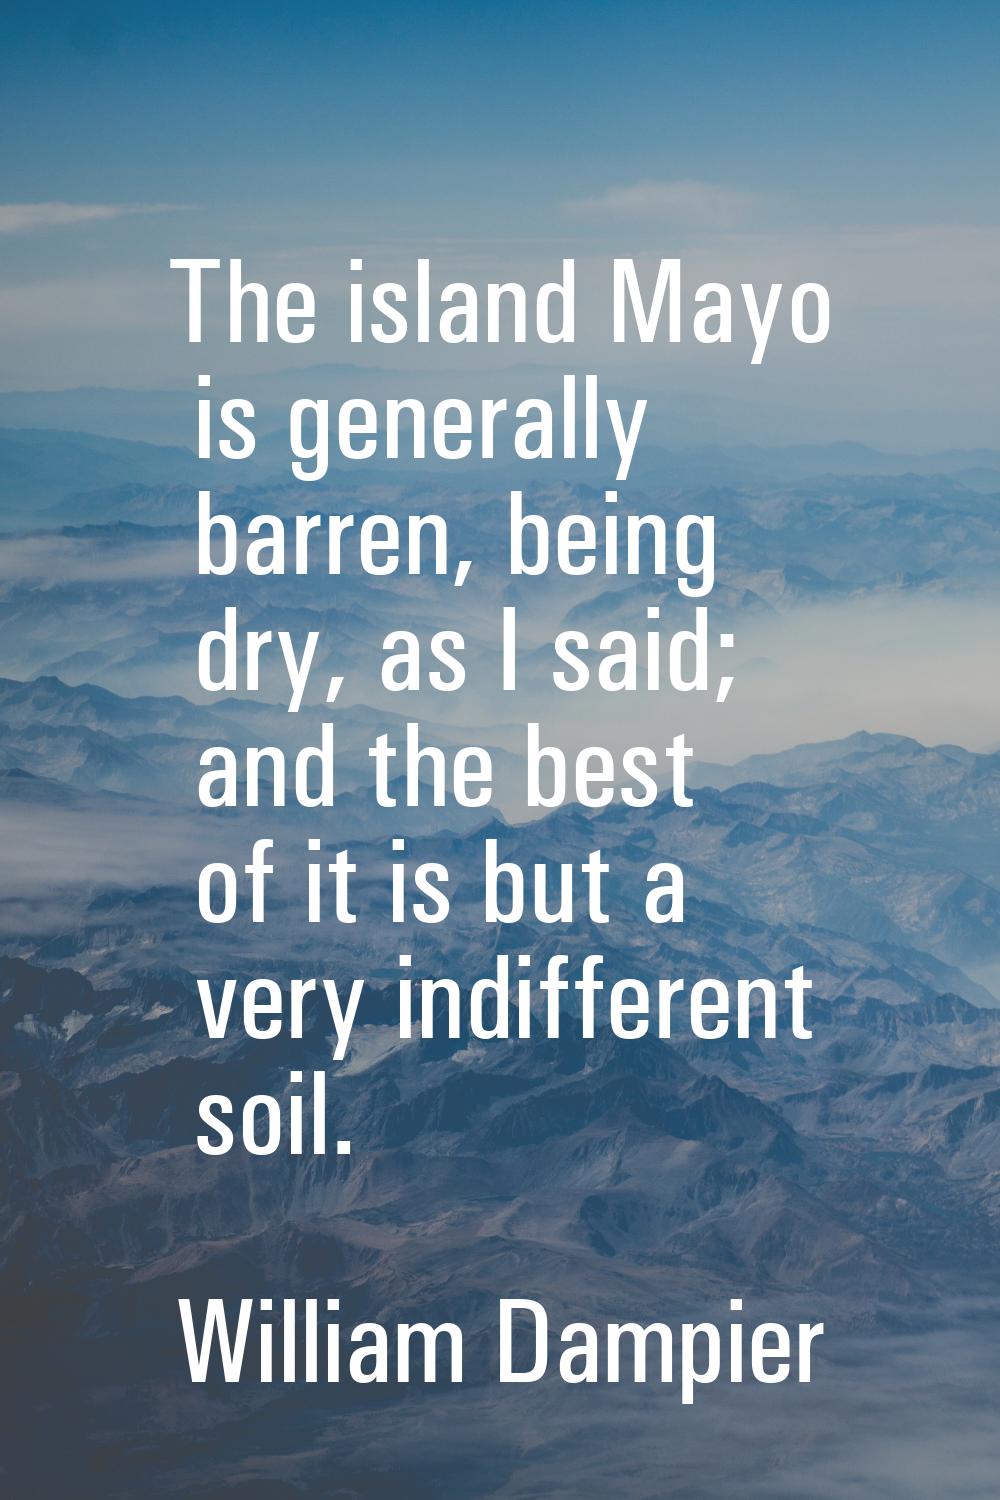 The island Mayo is generally barren, being dry, as I said; and the best of it is but a very indiffe